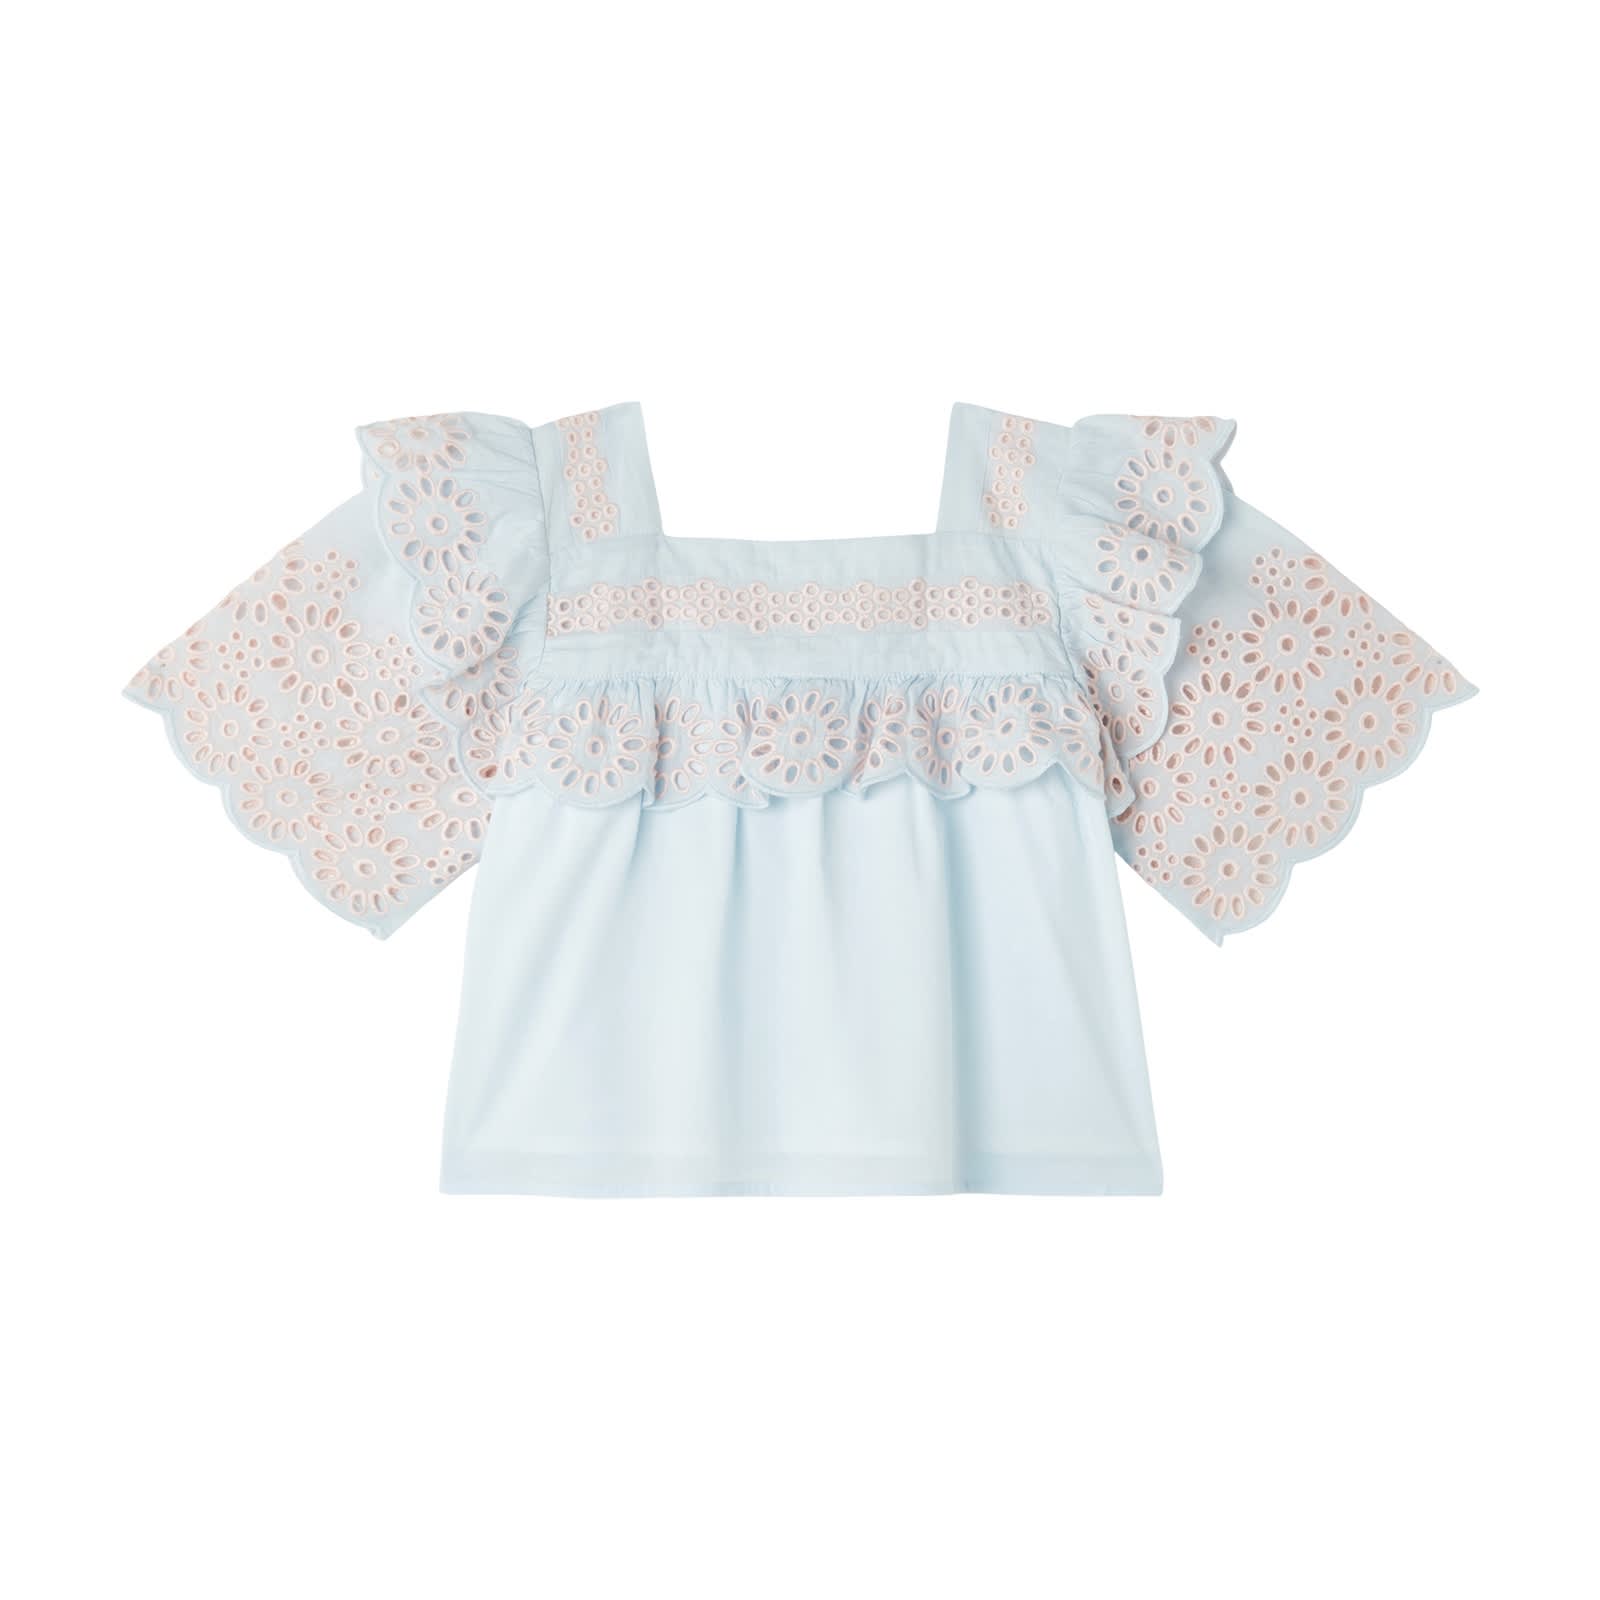 STELLA MCCARTNEY TOP WITH EMBROIDERY